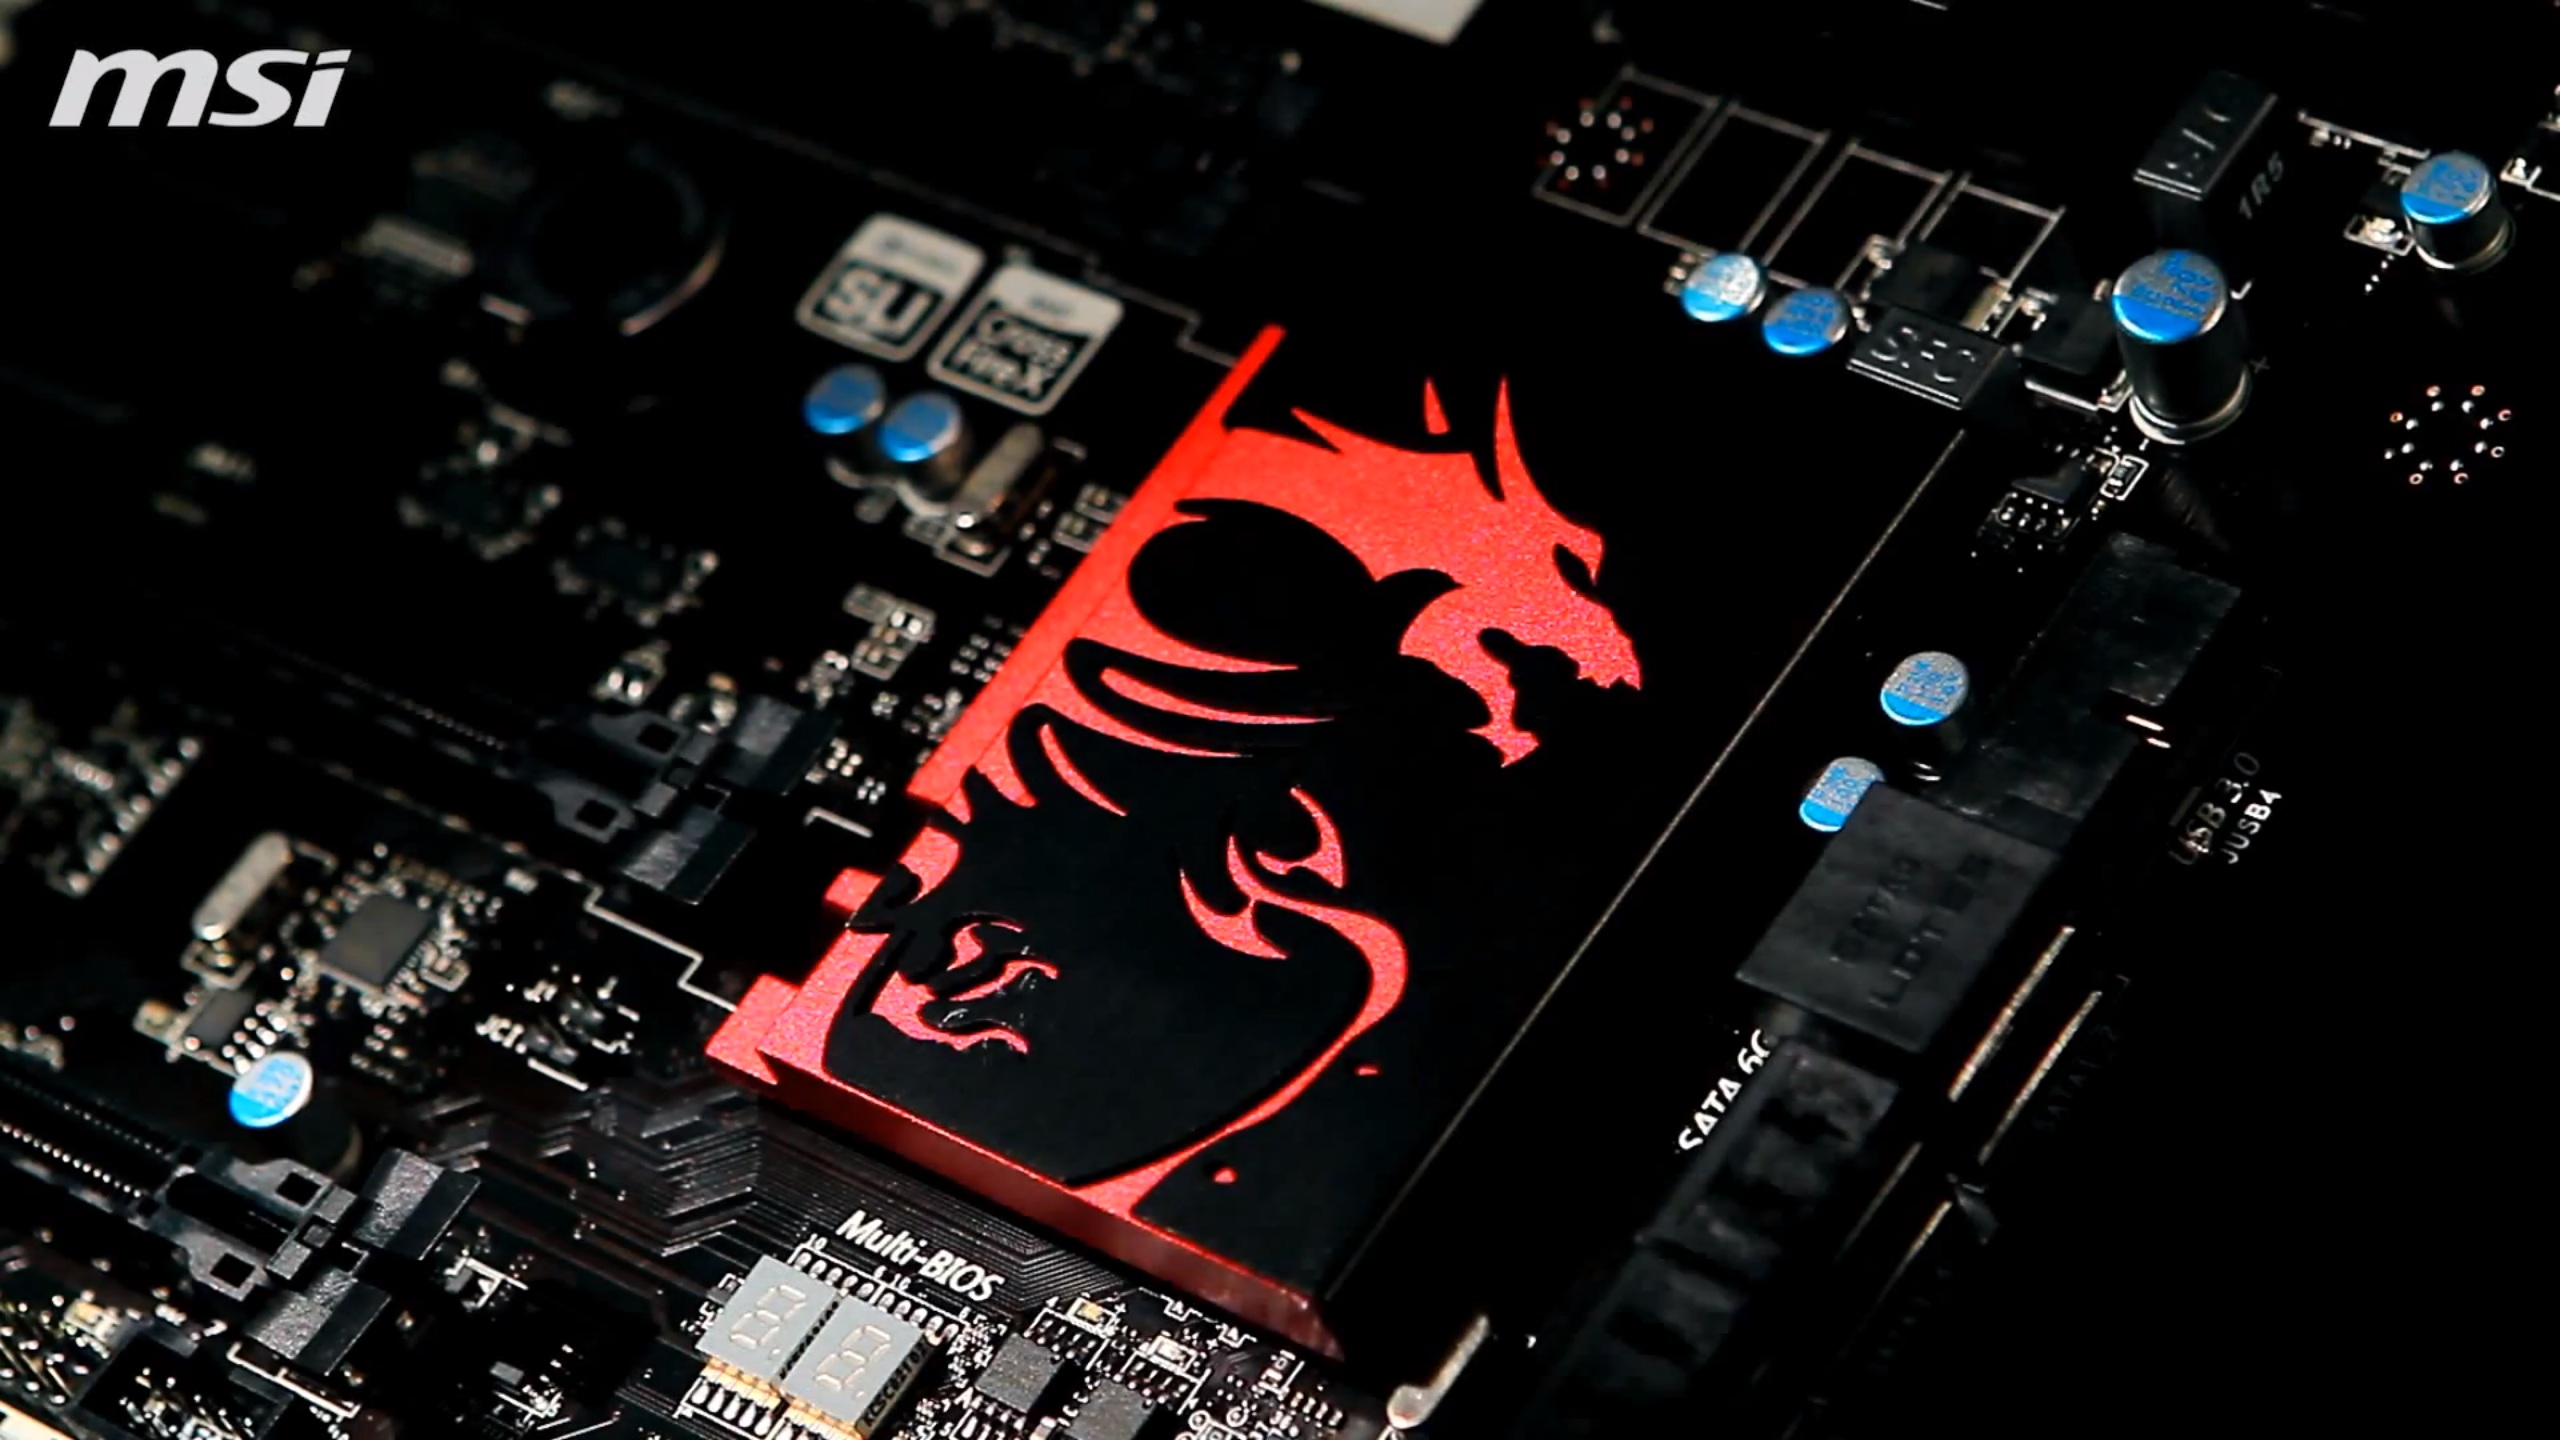 The MSI Z77A GD65 Gaming would be showcased by MSI at CeBIT in all its